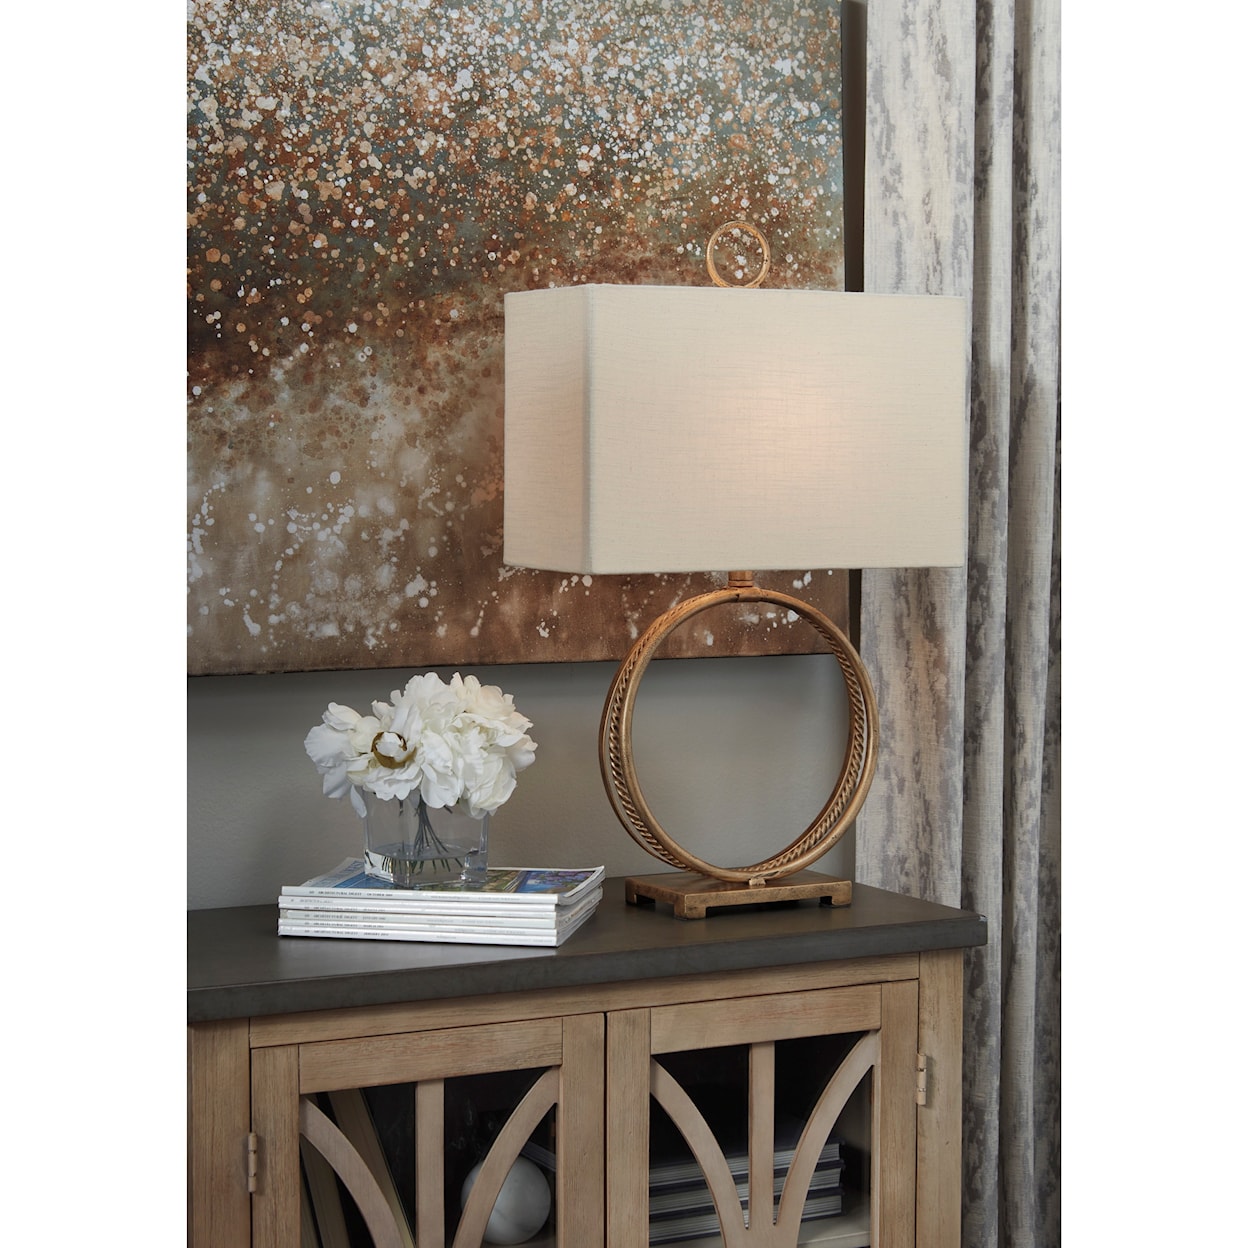 Signature Design by Ashley Lamps - Contemporary Mahala Antique Gold Metal Table Lamp